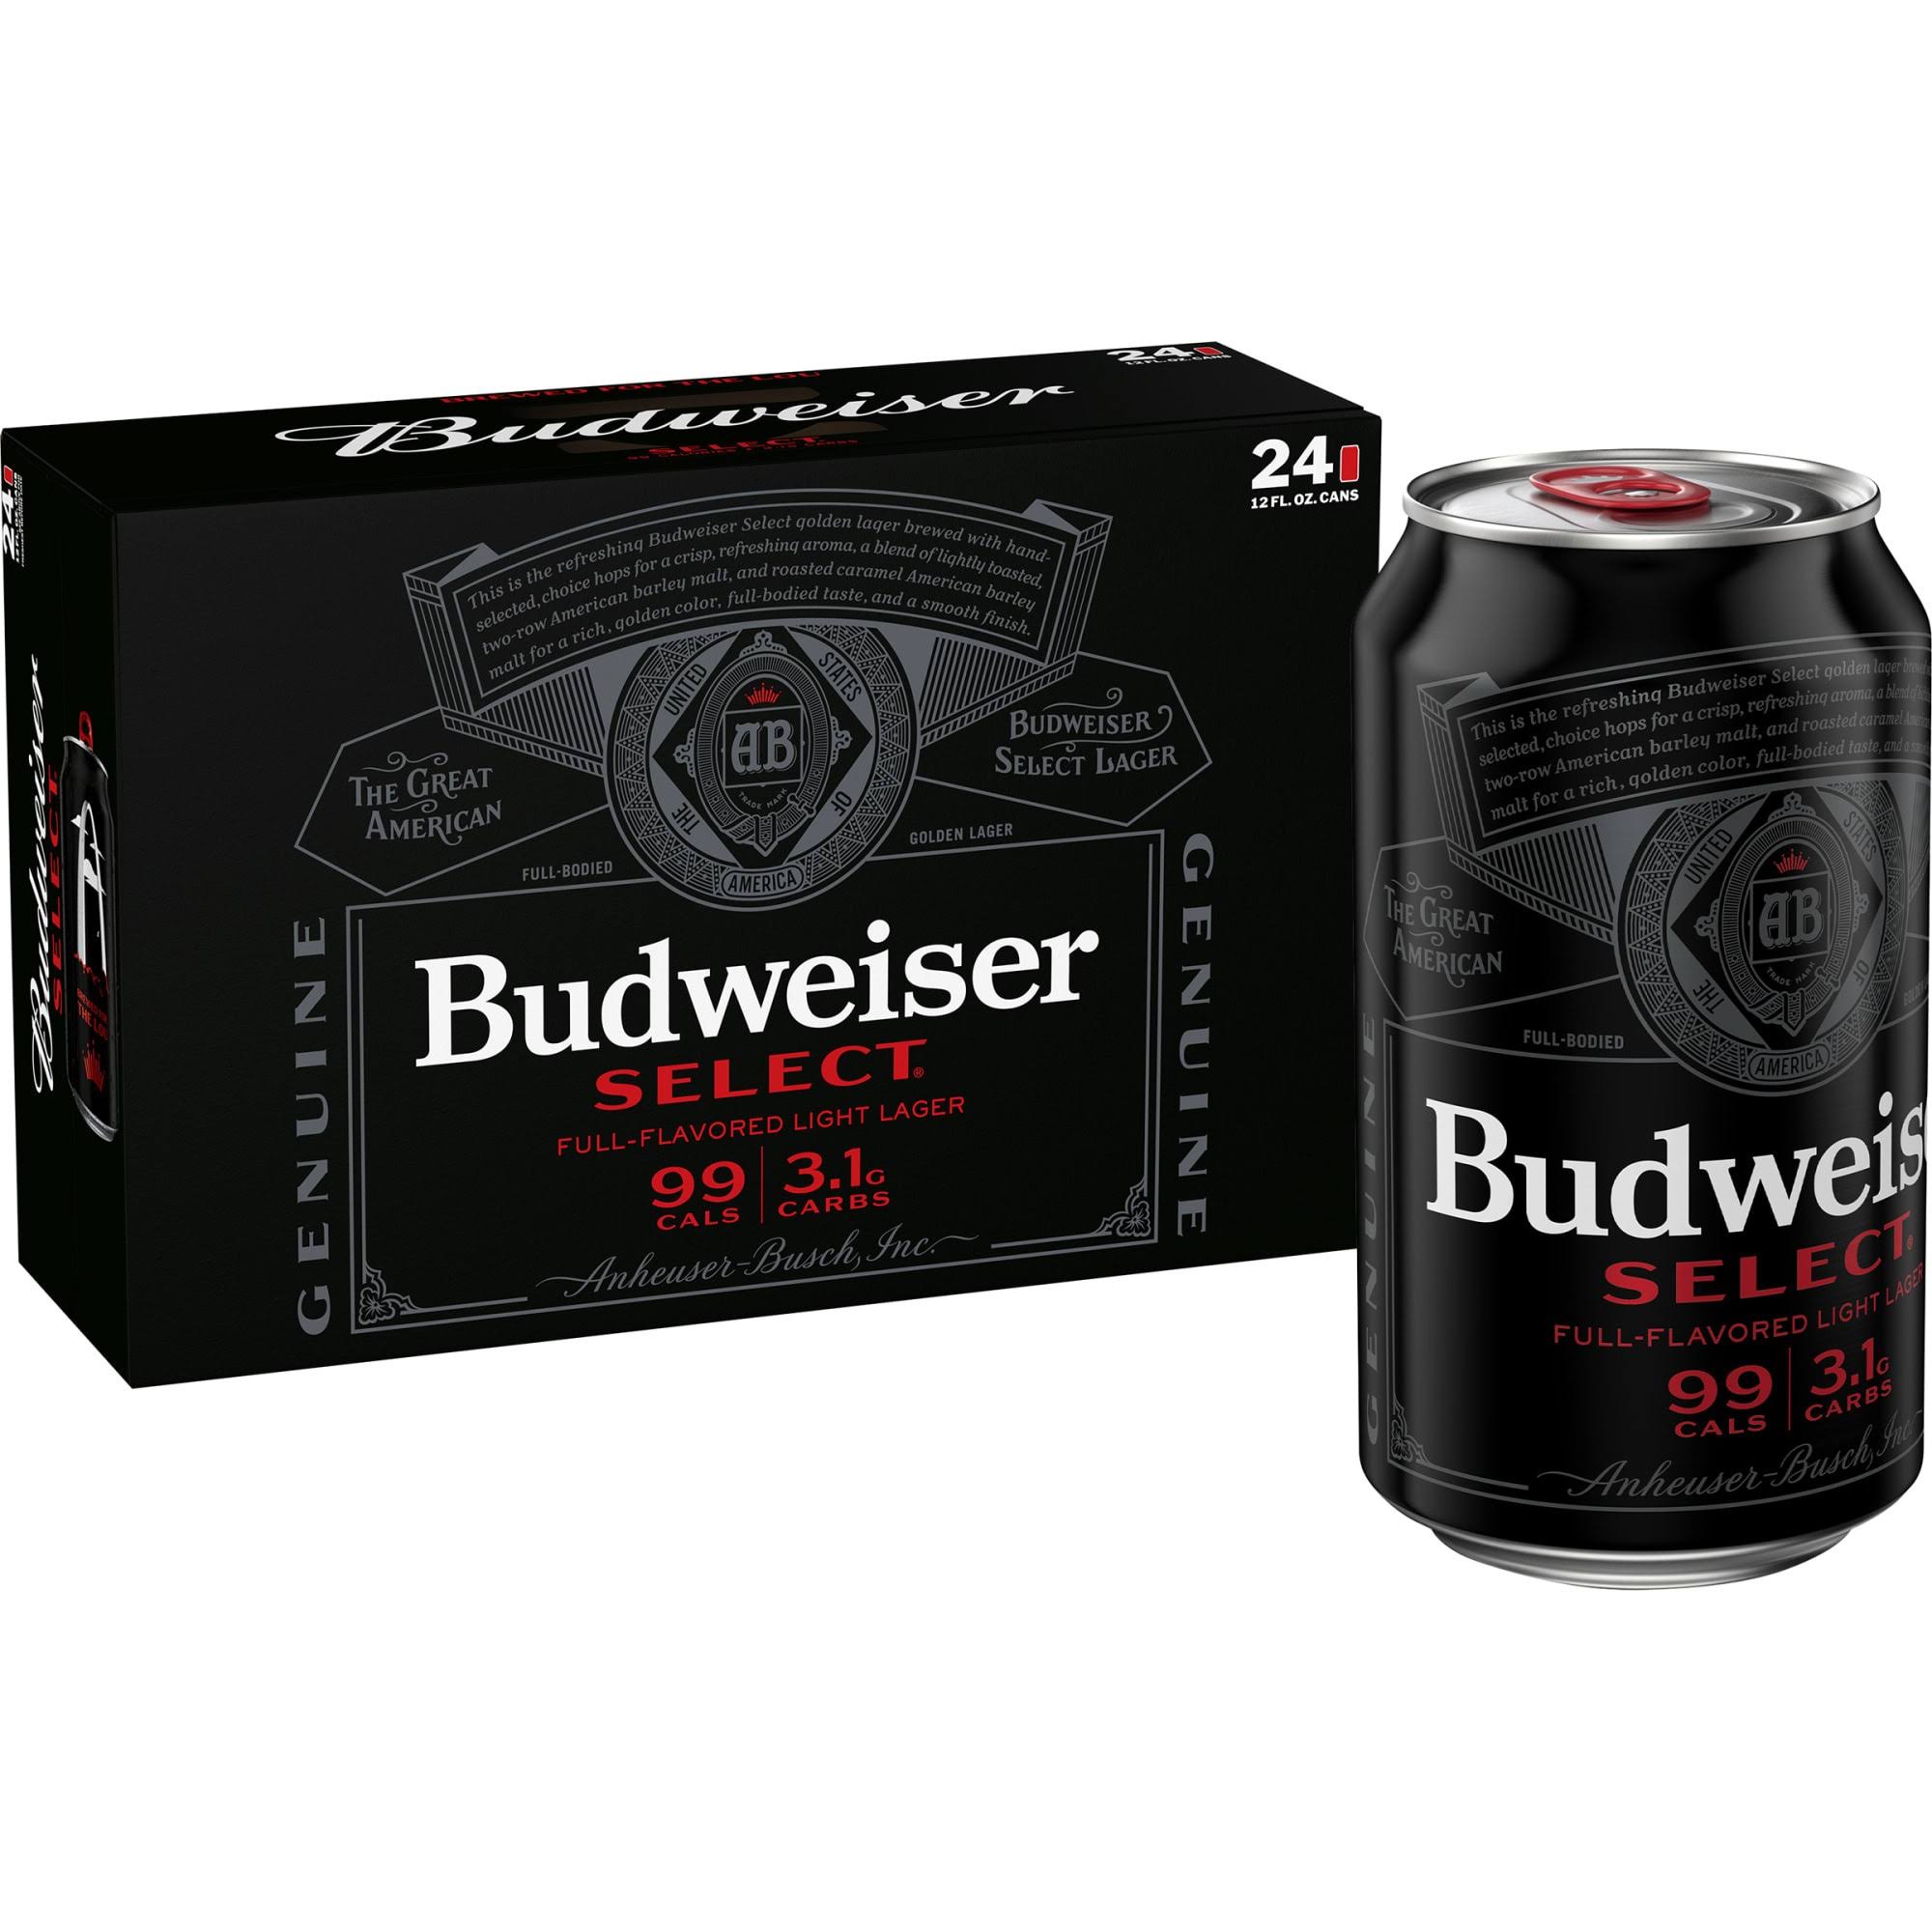 Budweiser Select Beer - 24 Cans